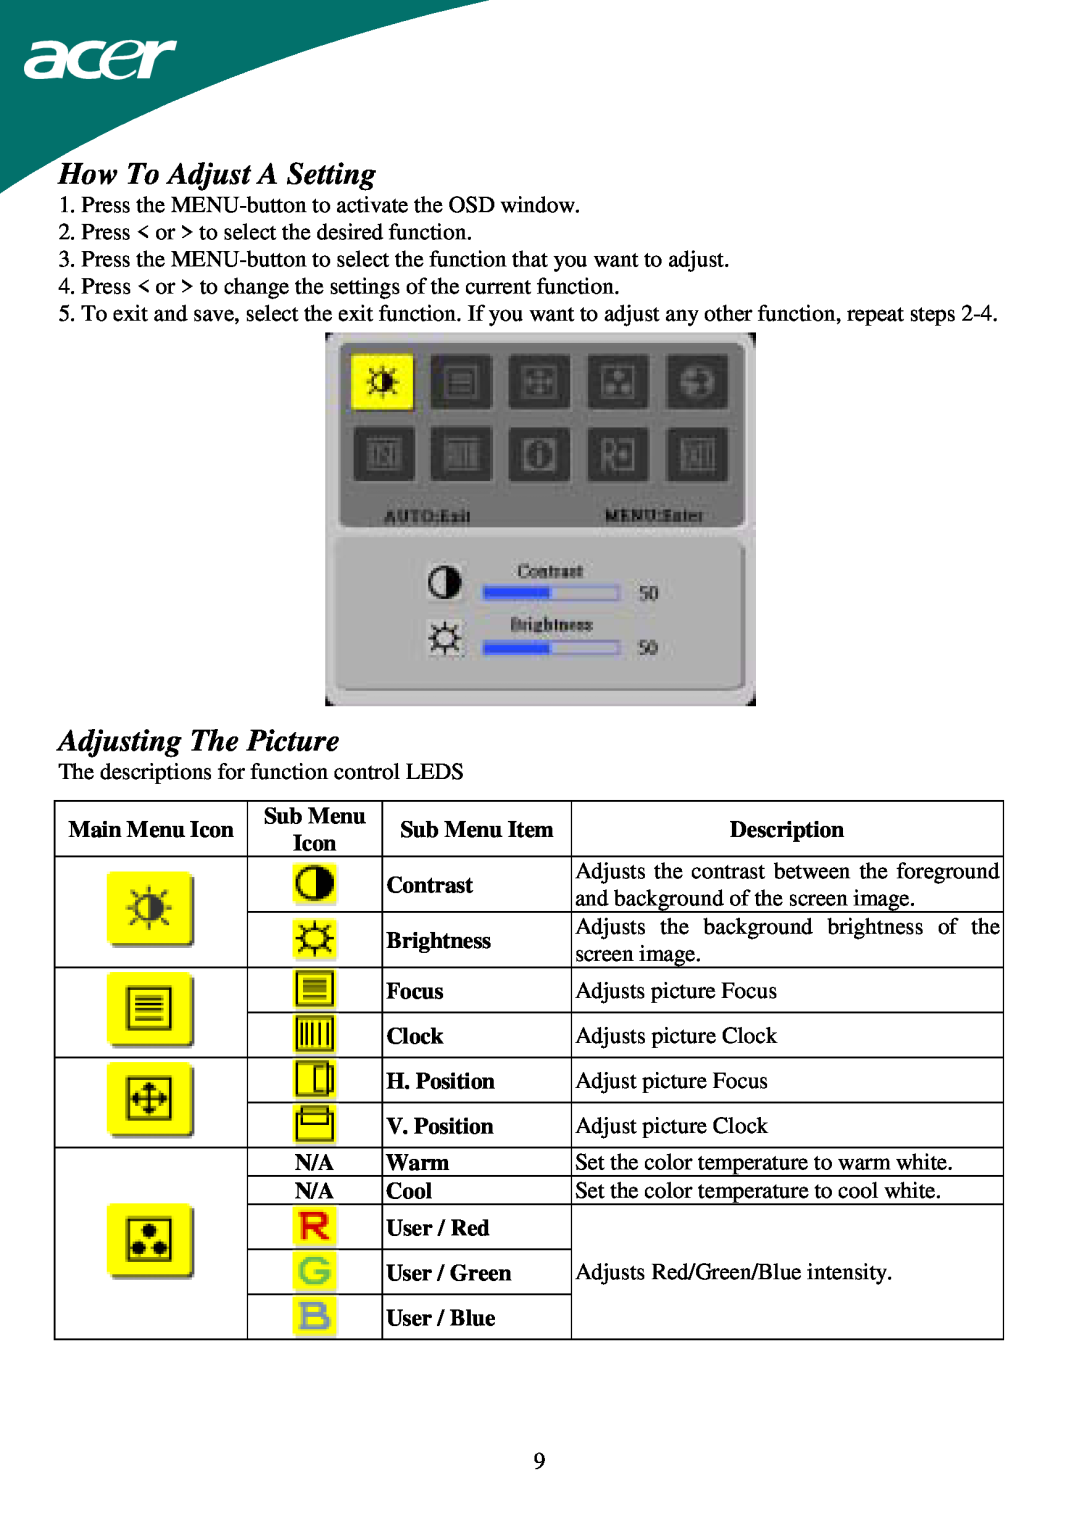 Acer AL1715 important safety instructions How To Adjust A Setting, Adjusting The Picture 